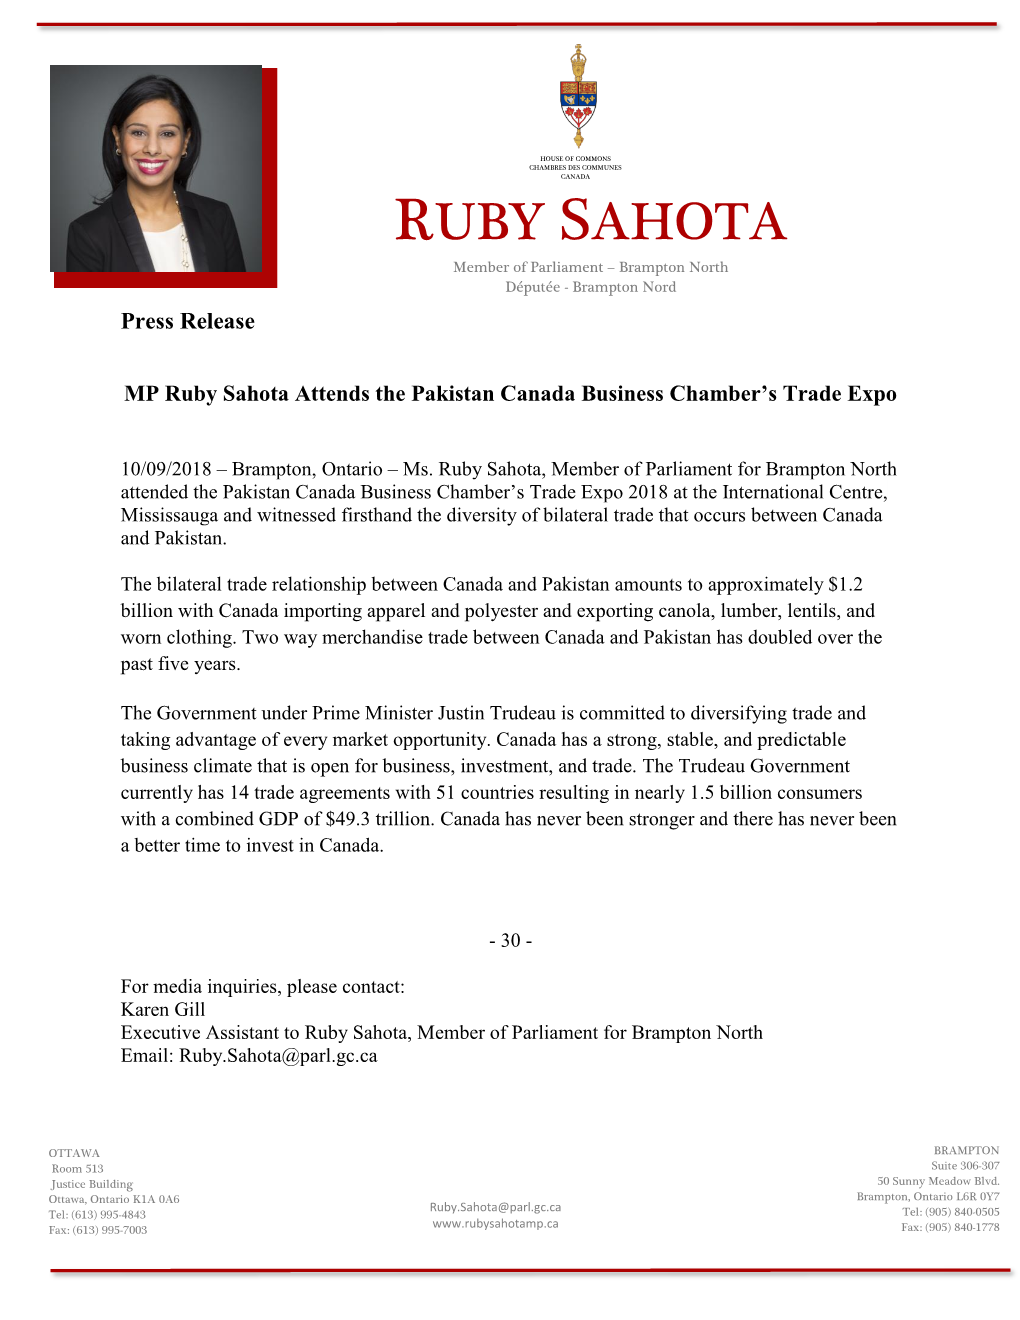 MP Ruby Sahota Attends the Pakistan Canada Business Chamber's